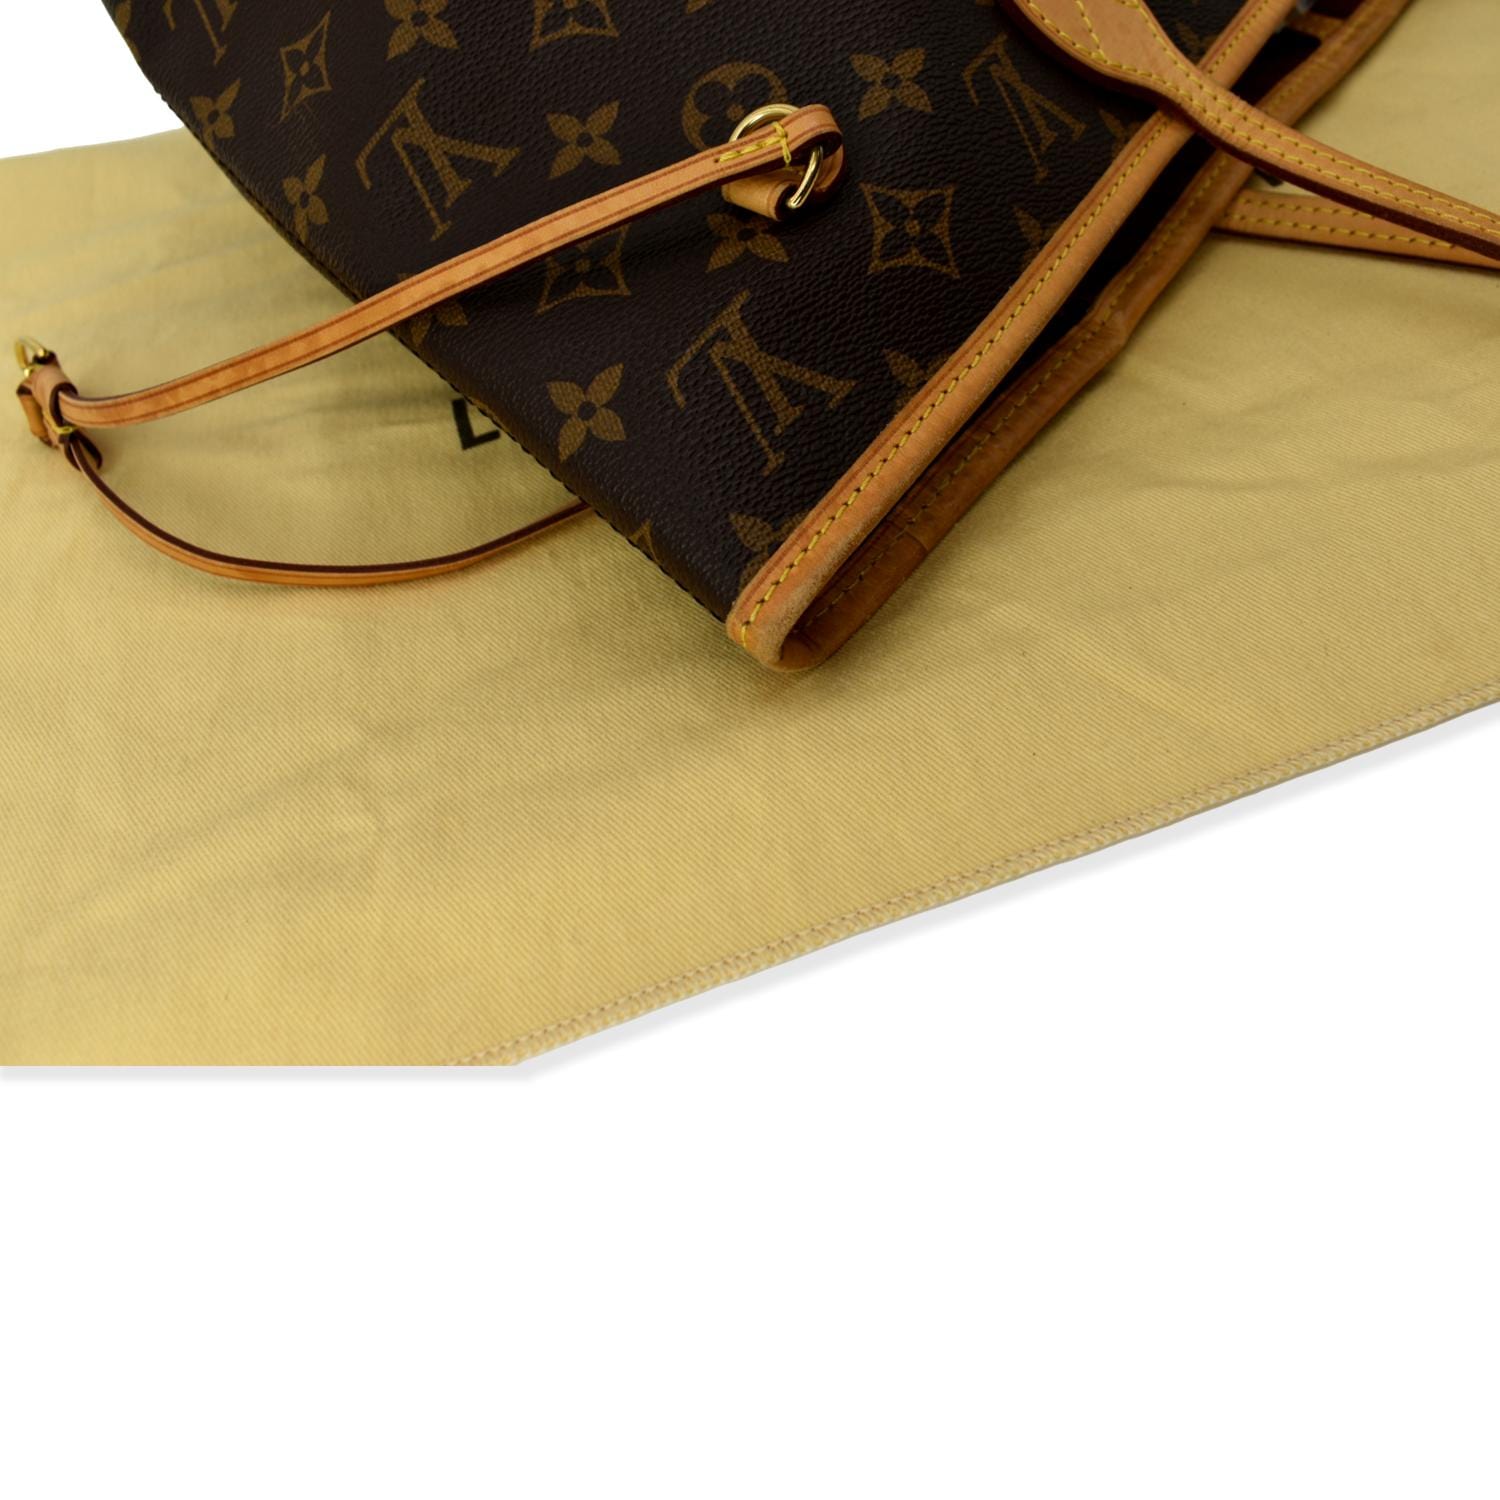 Louis+Vuitton+Neverfull+Tote+MM+Brown+Canvas for sale online